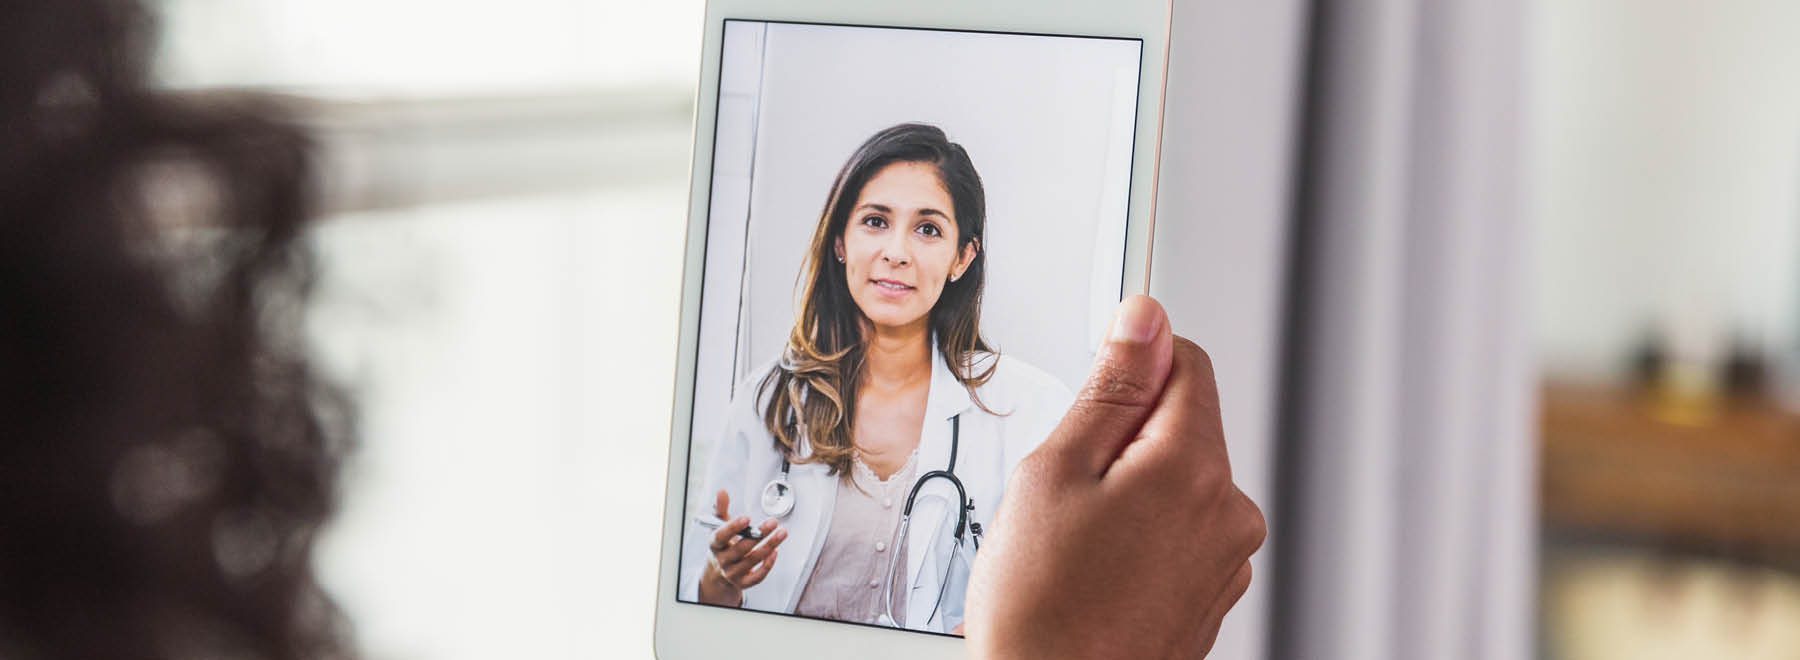 Patient holding tablet with telehealth provider on-screen.